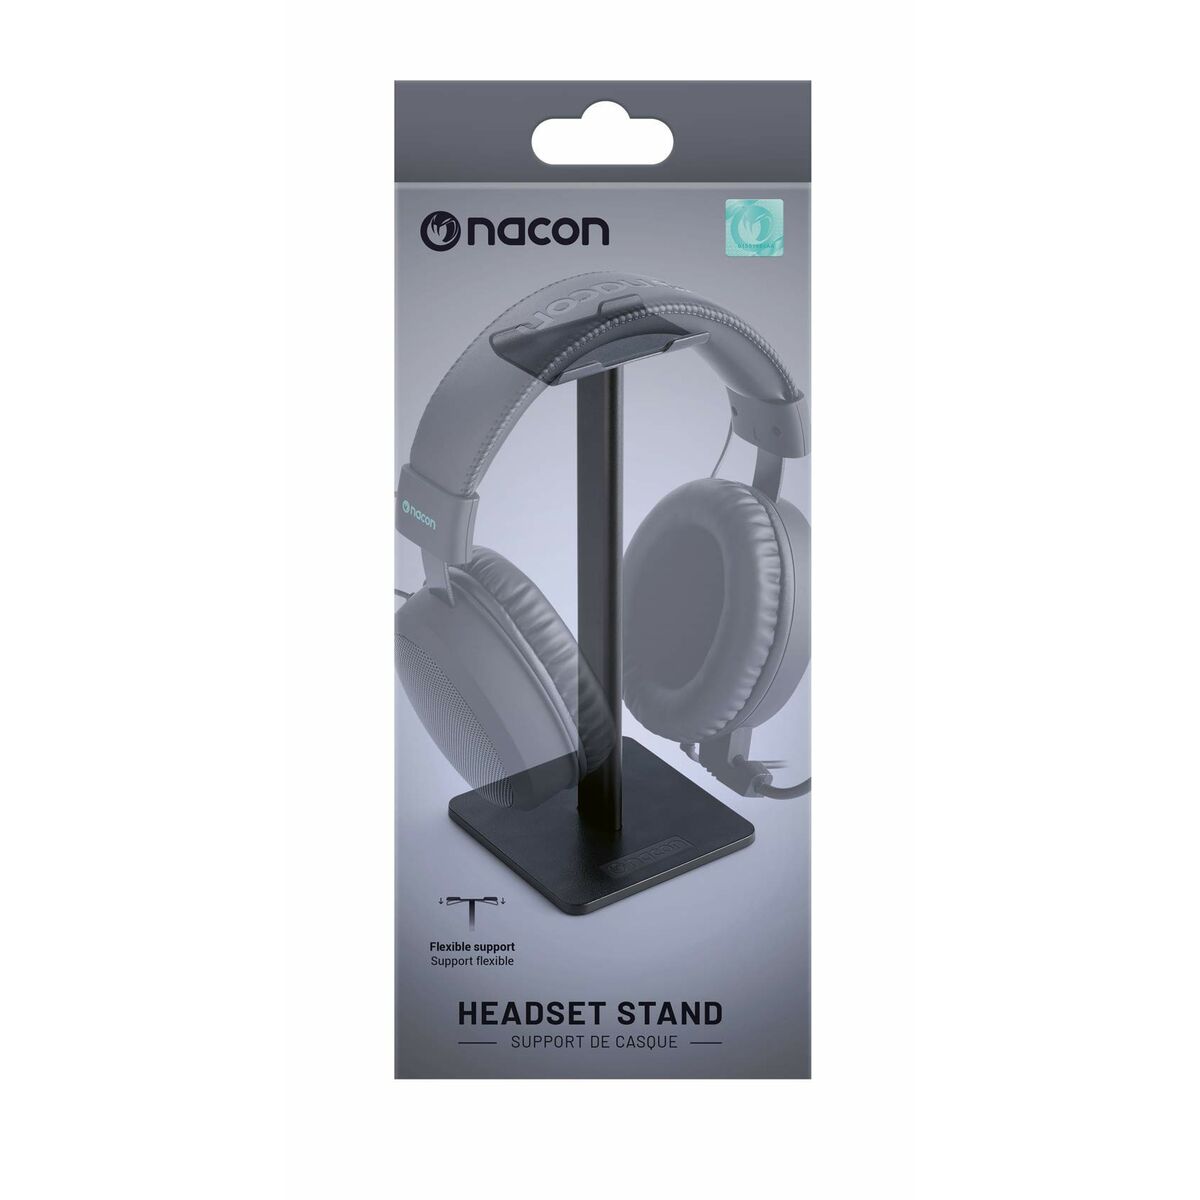 Headphone stand Nacon MULTIHEADSETSTAND, Nacon, Electronics, Mobile communication and accessories, headphone-stand-nacon-multiheadsetstand, Brand_Nacon, category-reference-2609, category-reference-2642, category-reference-2847, category-reference-t-19653, category-reference-t-21312, category-reference-t-25535, category-reference-t-4036, category-reference-t-4037, computers / peripherals, Condition_NEW, entertainment, music, office, Price_20 - 50, telephones & tablets, Teleworking, RiotNook